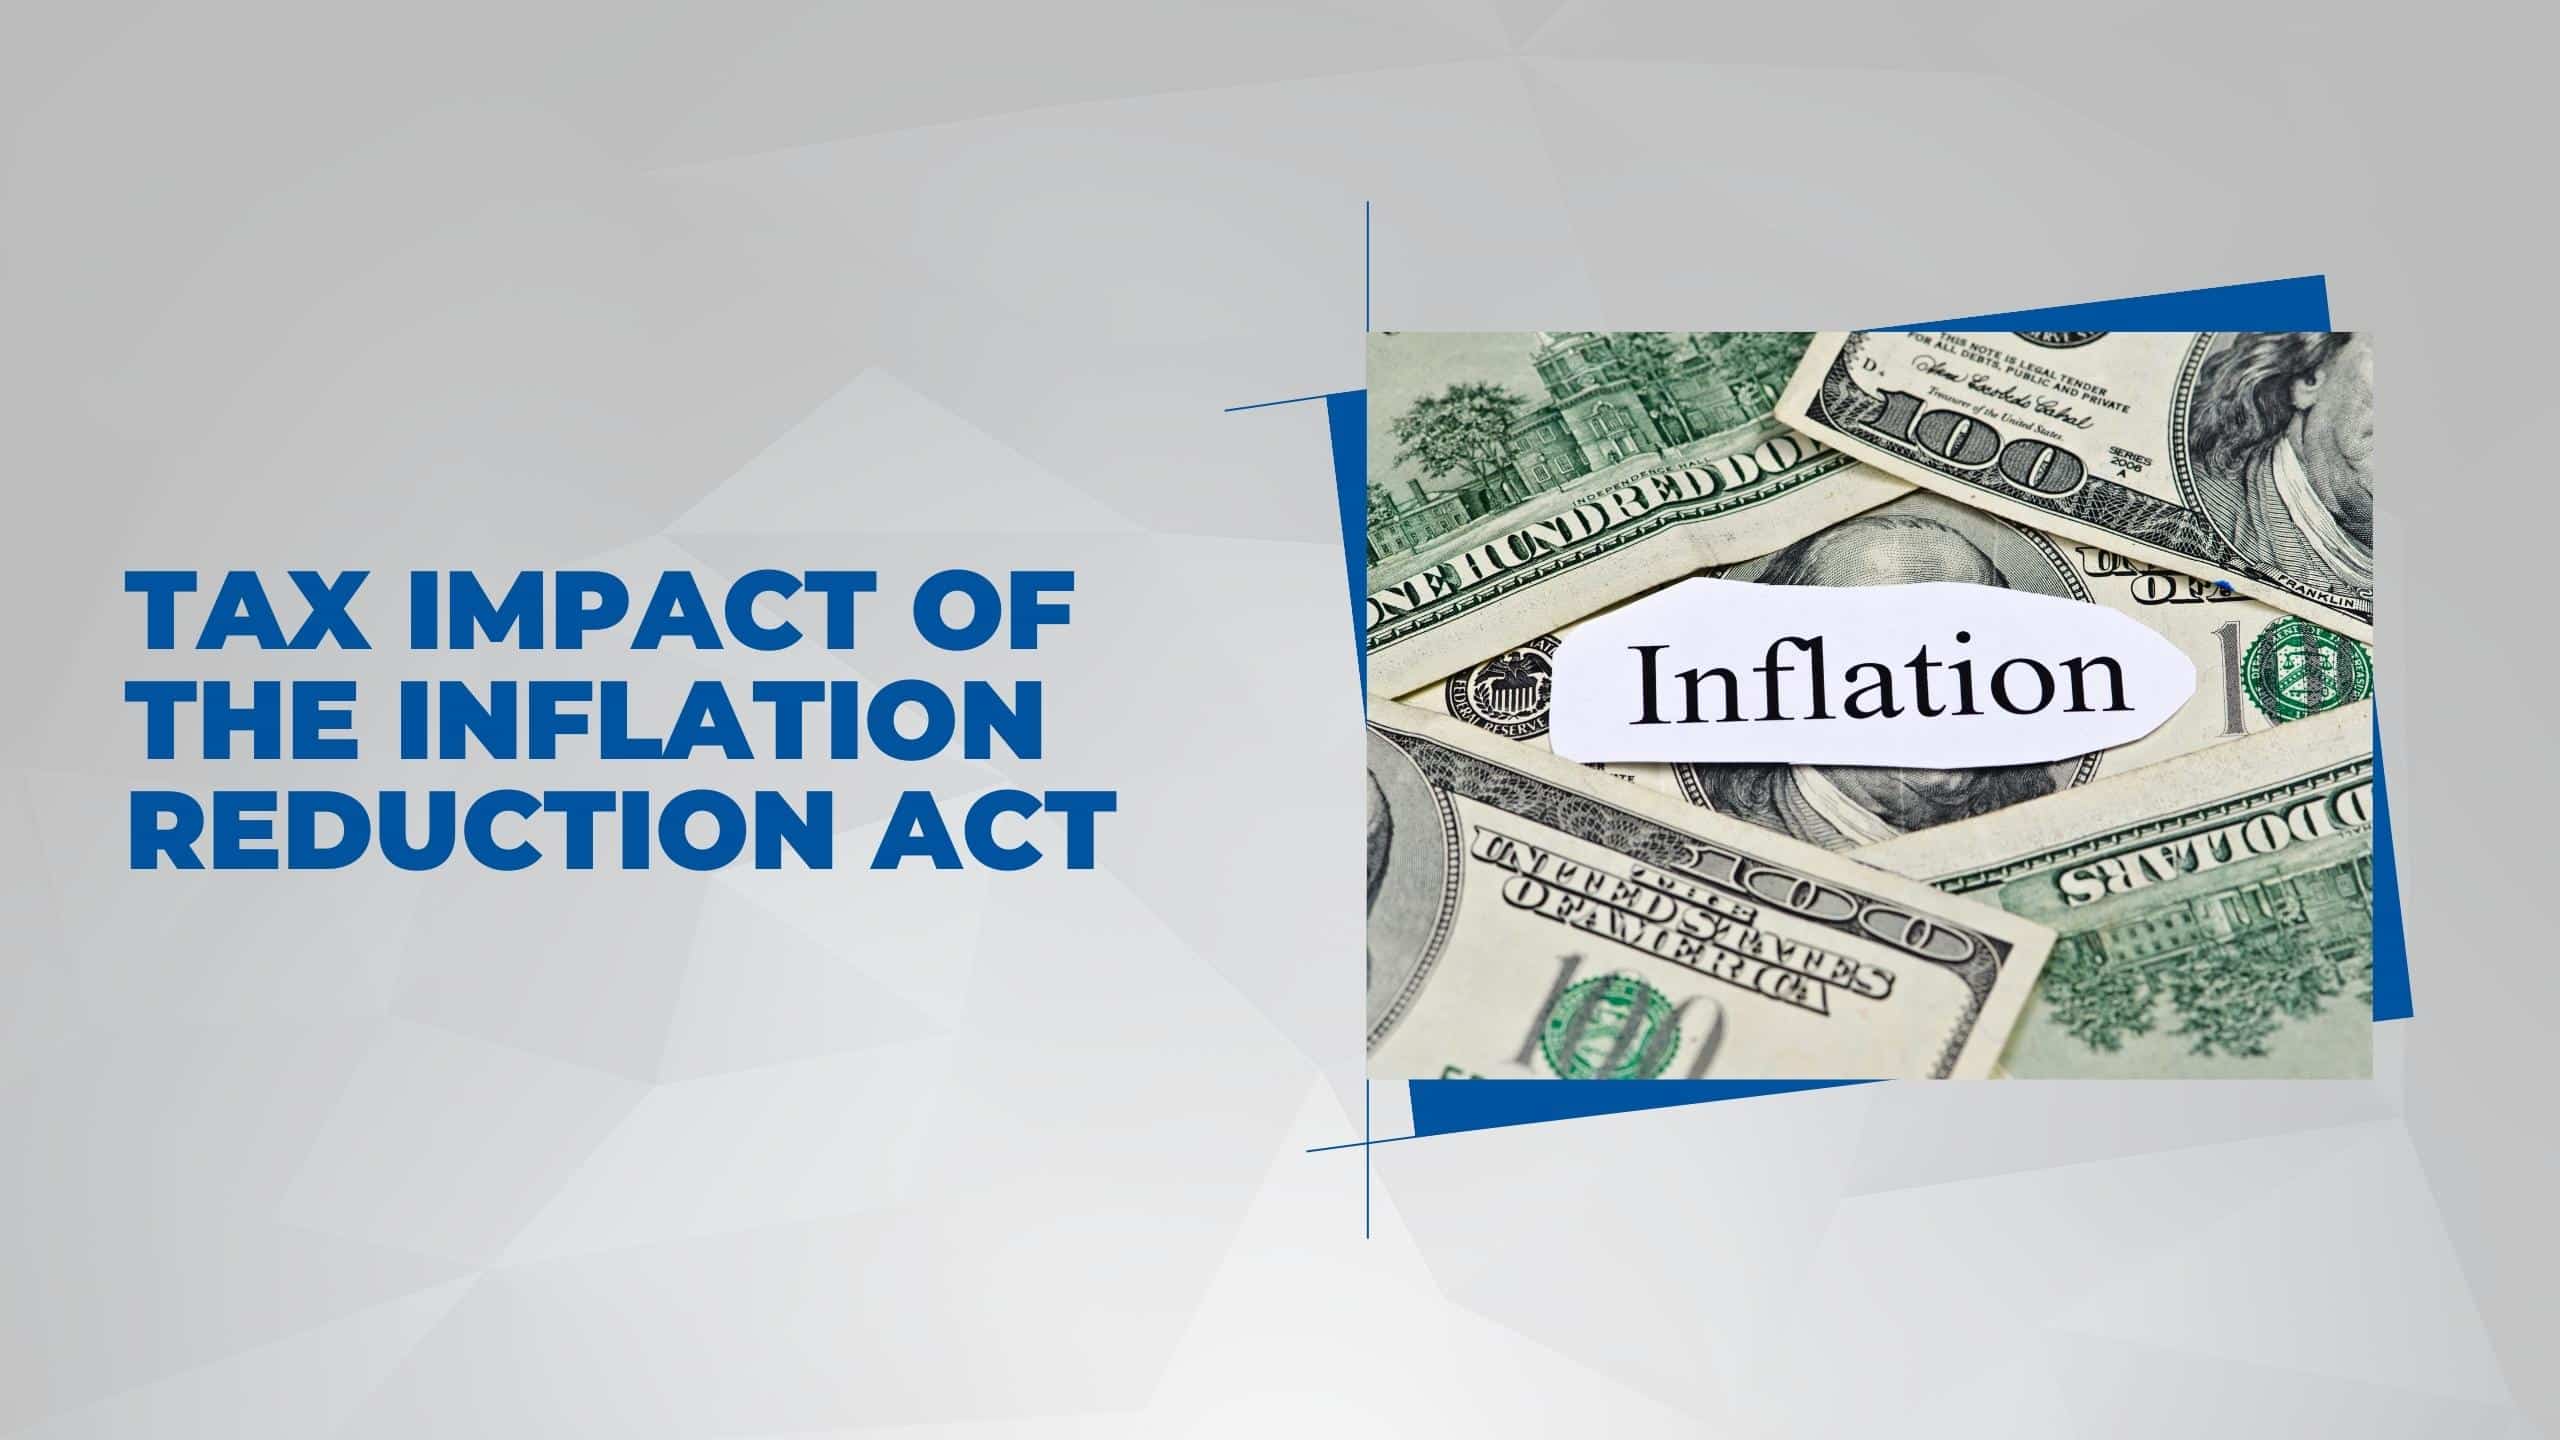 Tax Impact of The Inflation Reduction Act